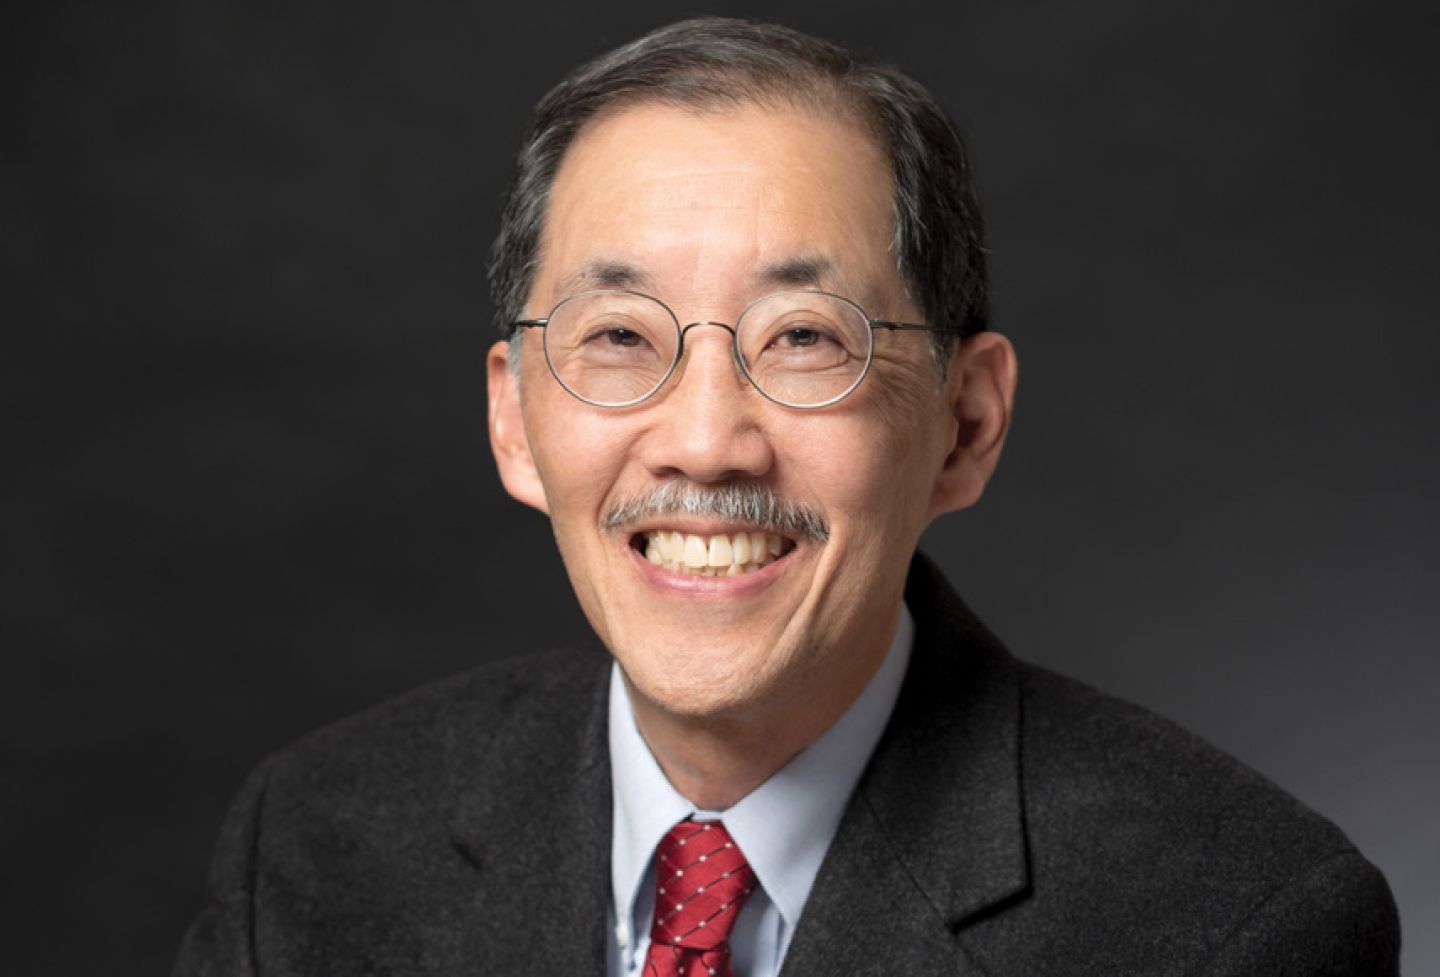 Professor George Yin retired in the spring after 25 years at the Law School and a rich career as an influential tax expert.